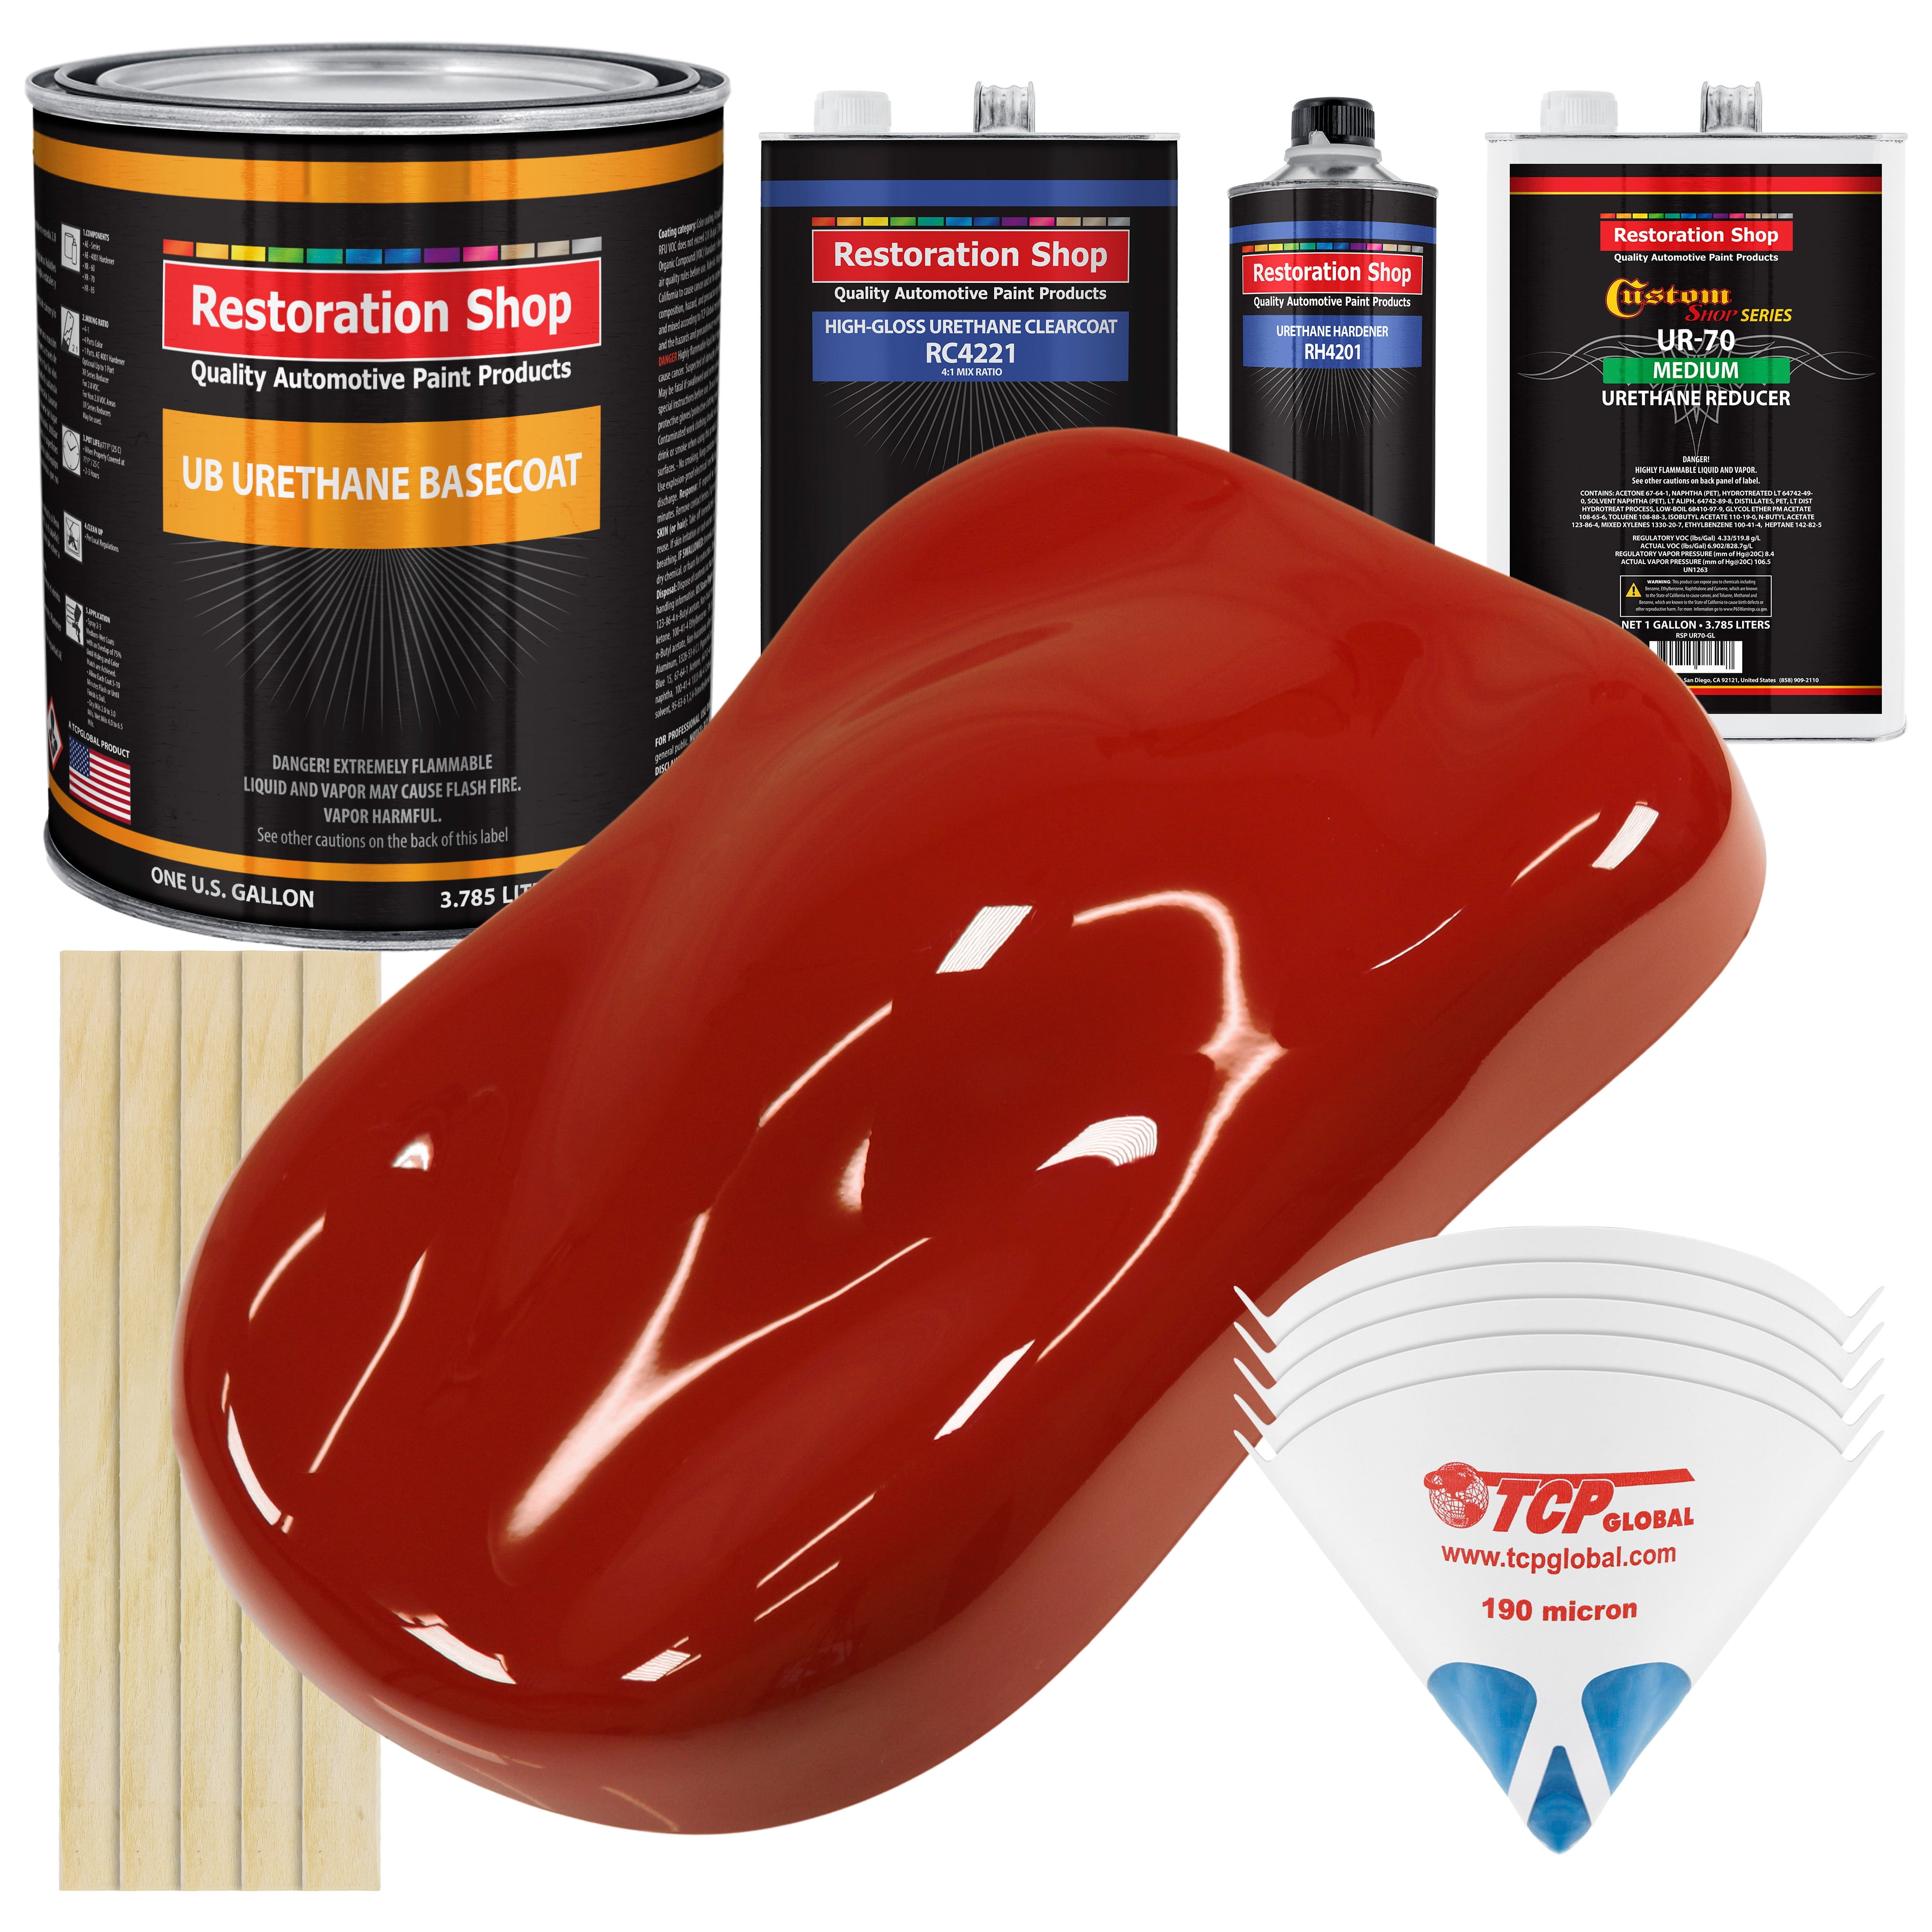 Candy Apple Red Gallon Urethane Basecoat Clearcoat Auto Paint Kit - Walmartcom